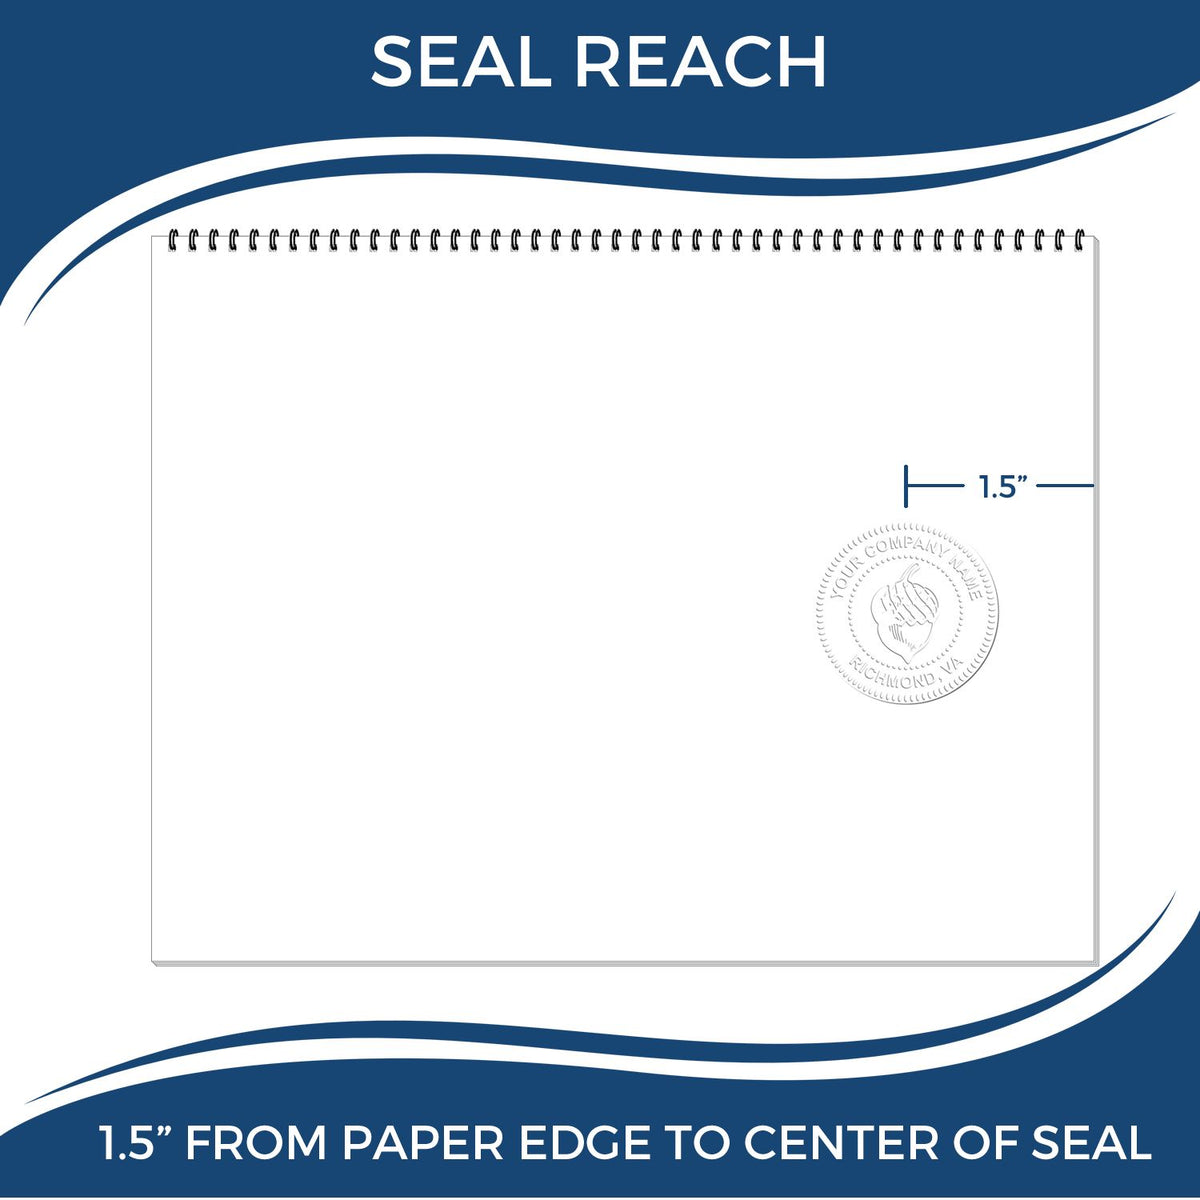 An infographic showing the seal reach which is represented by a ruler and a miniature seal image of the Handheld Arkansas Professional Geologist Embosser